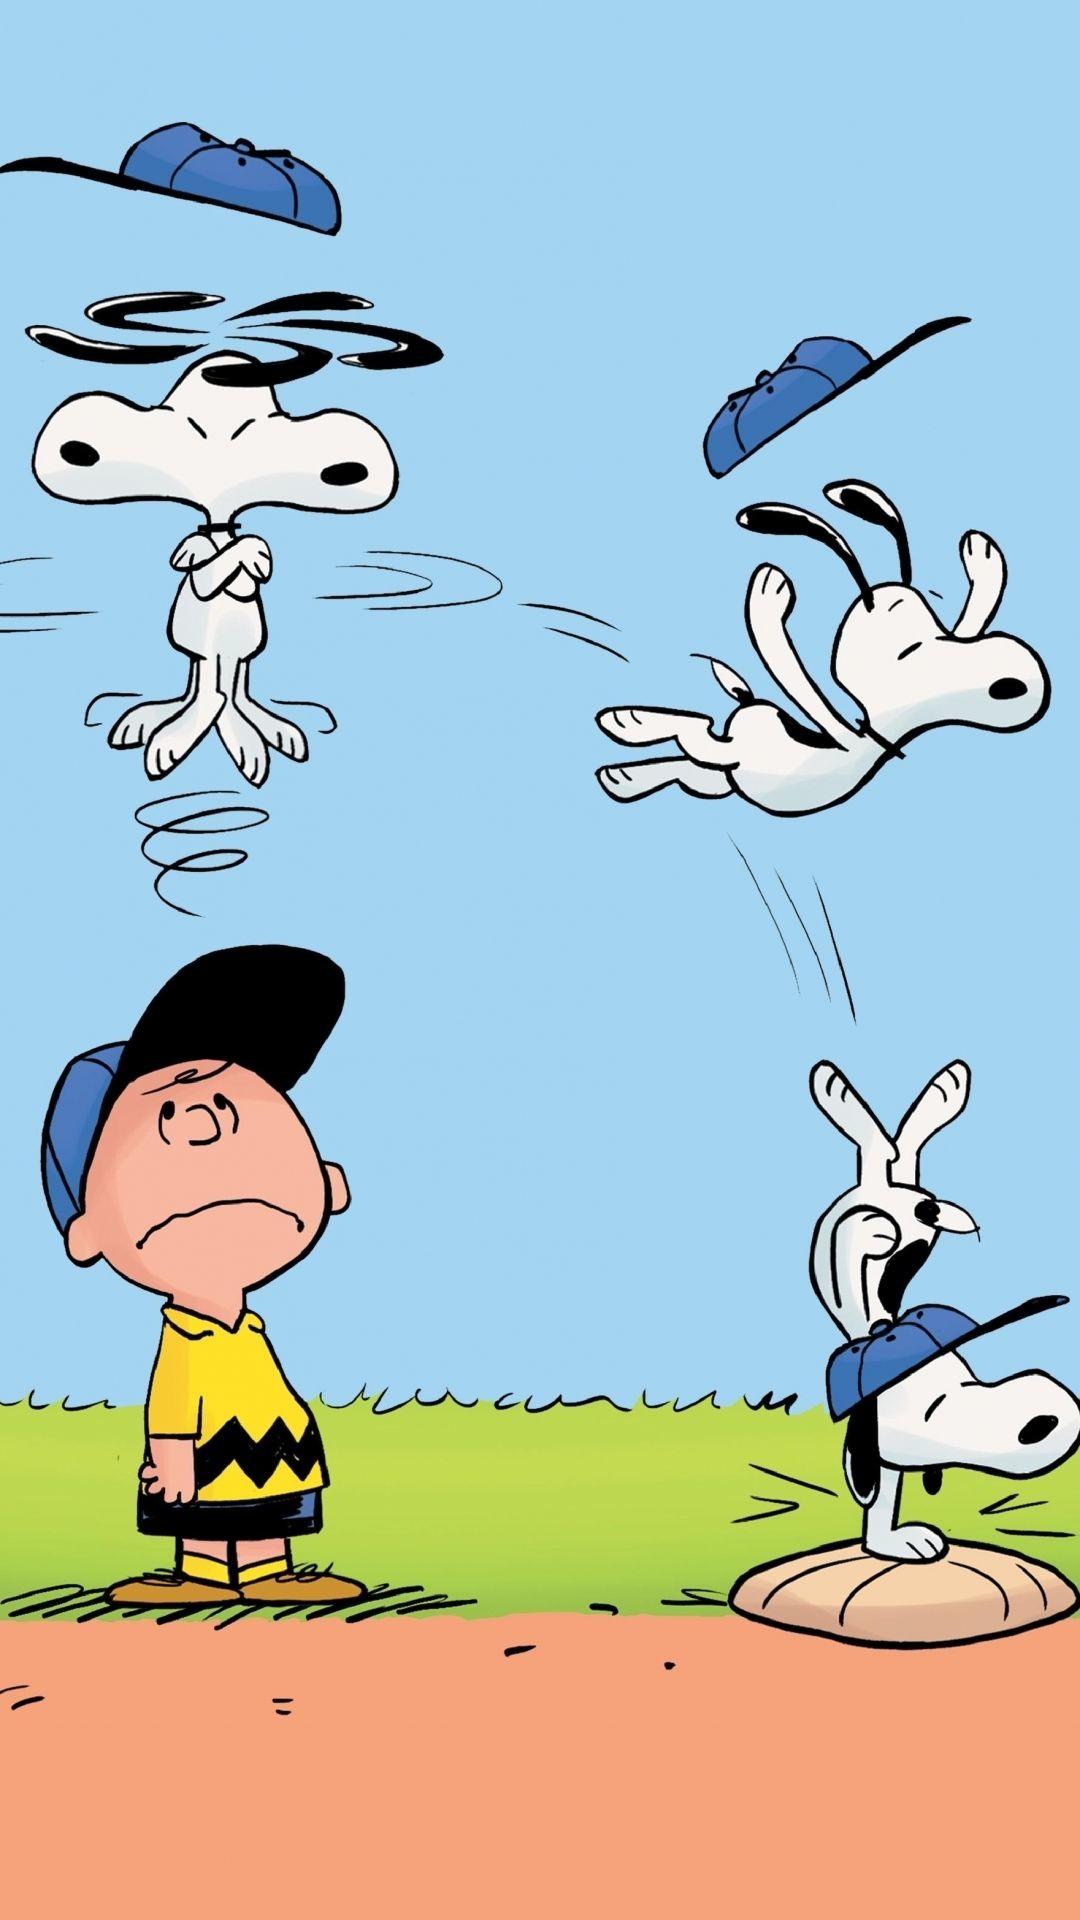 Peanuts Wallpaper background picture